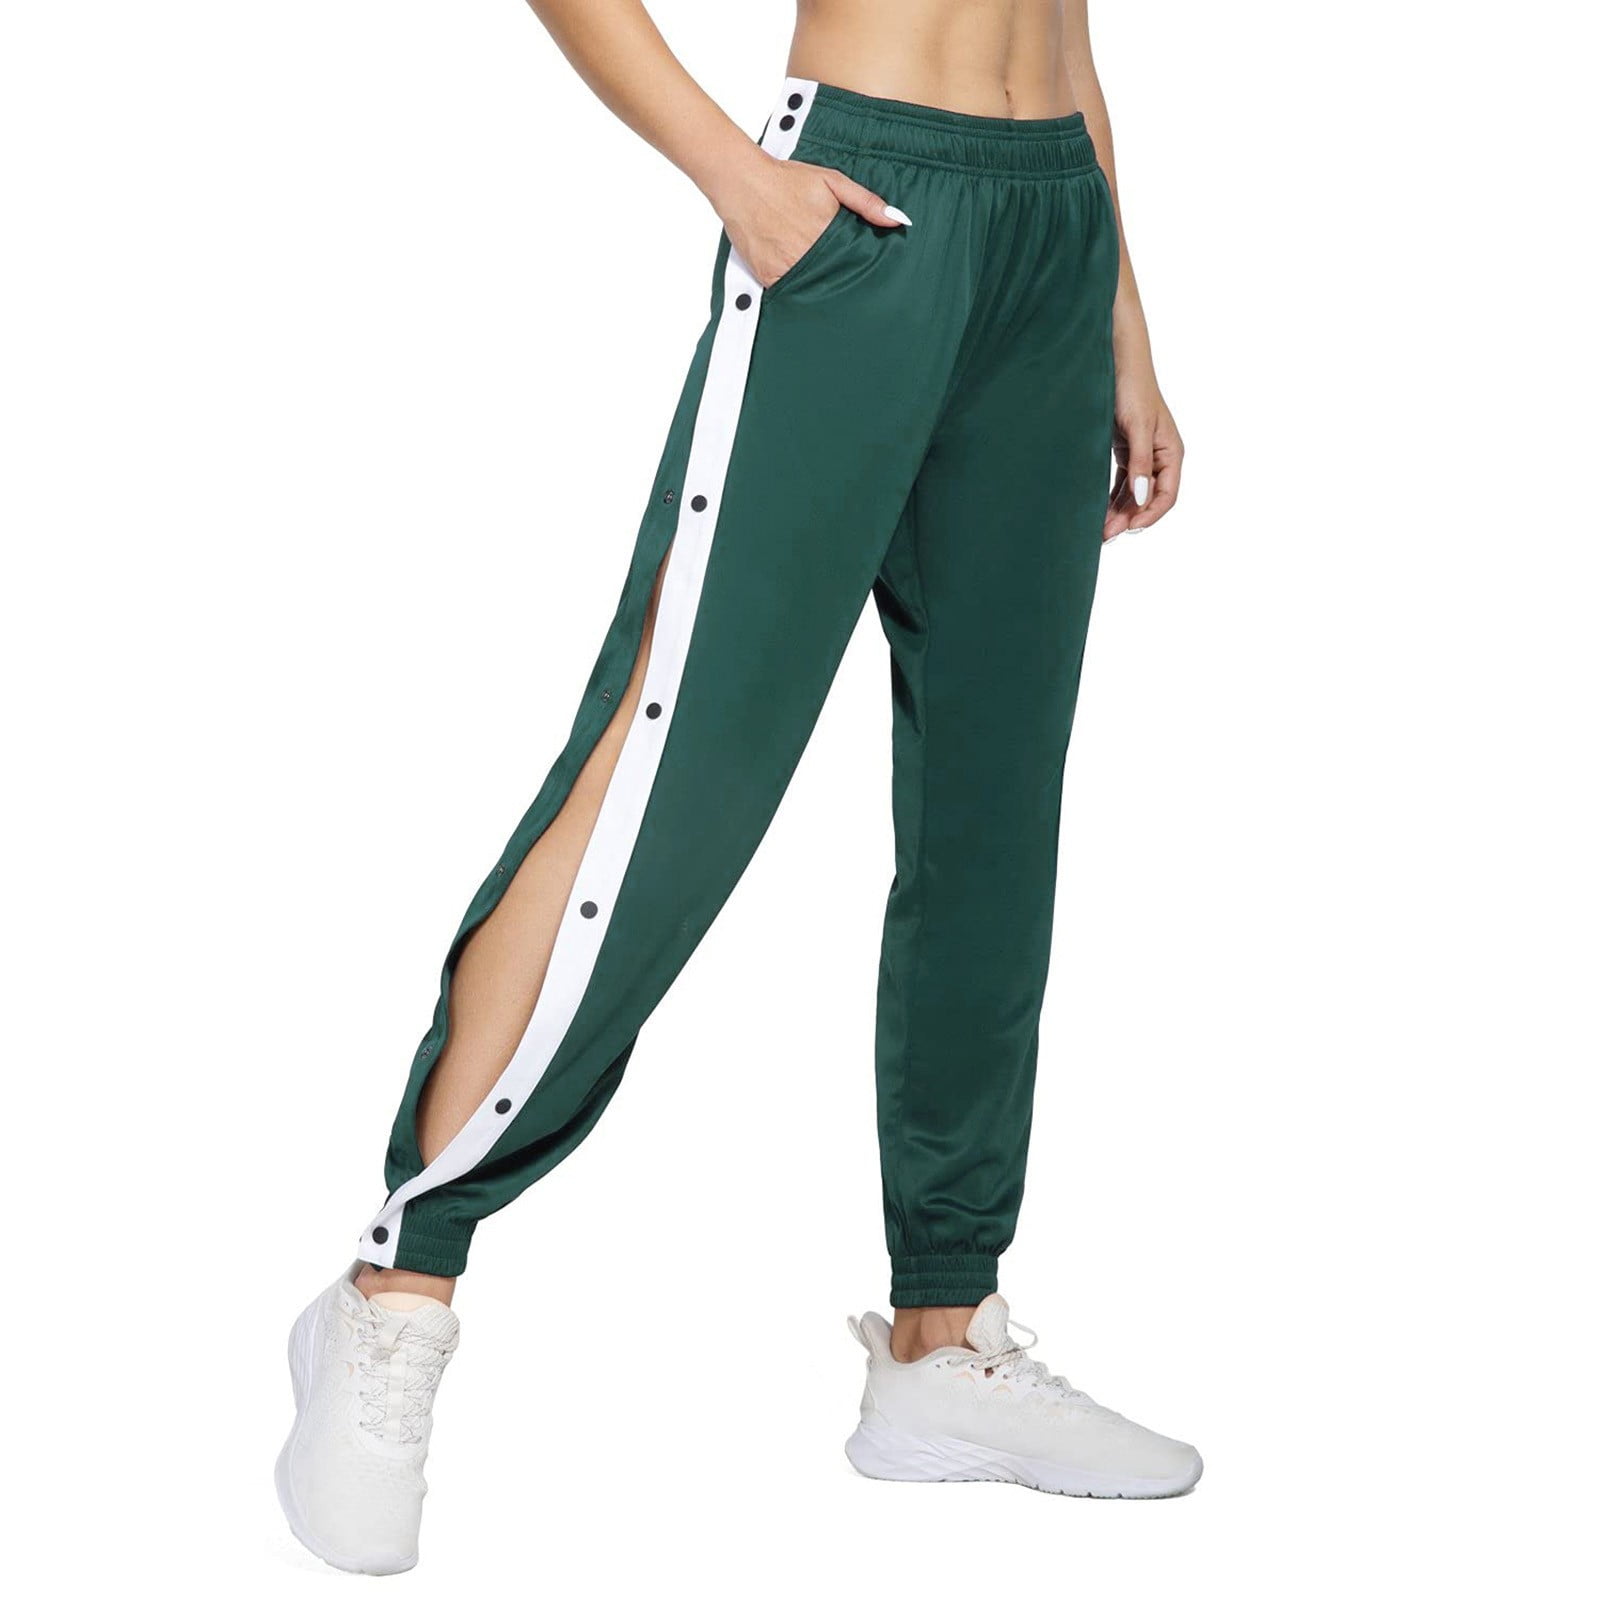 ZMHEGW Women's Tear Away Warm Up Pants Active Workout Tapered Sweatpants  With Pockets 